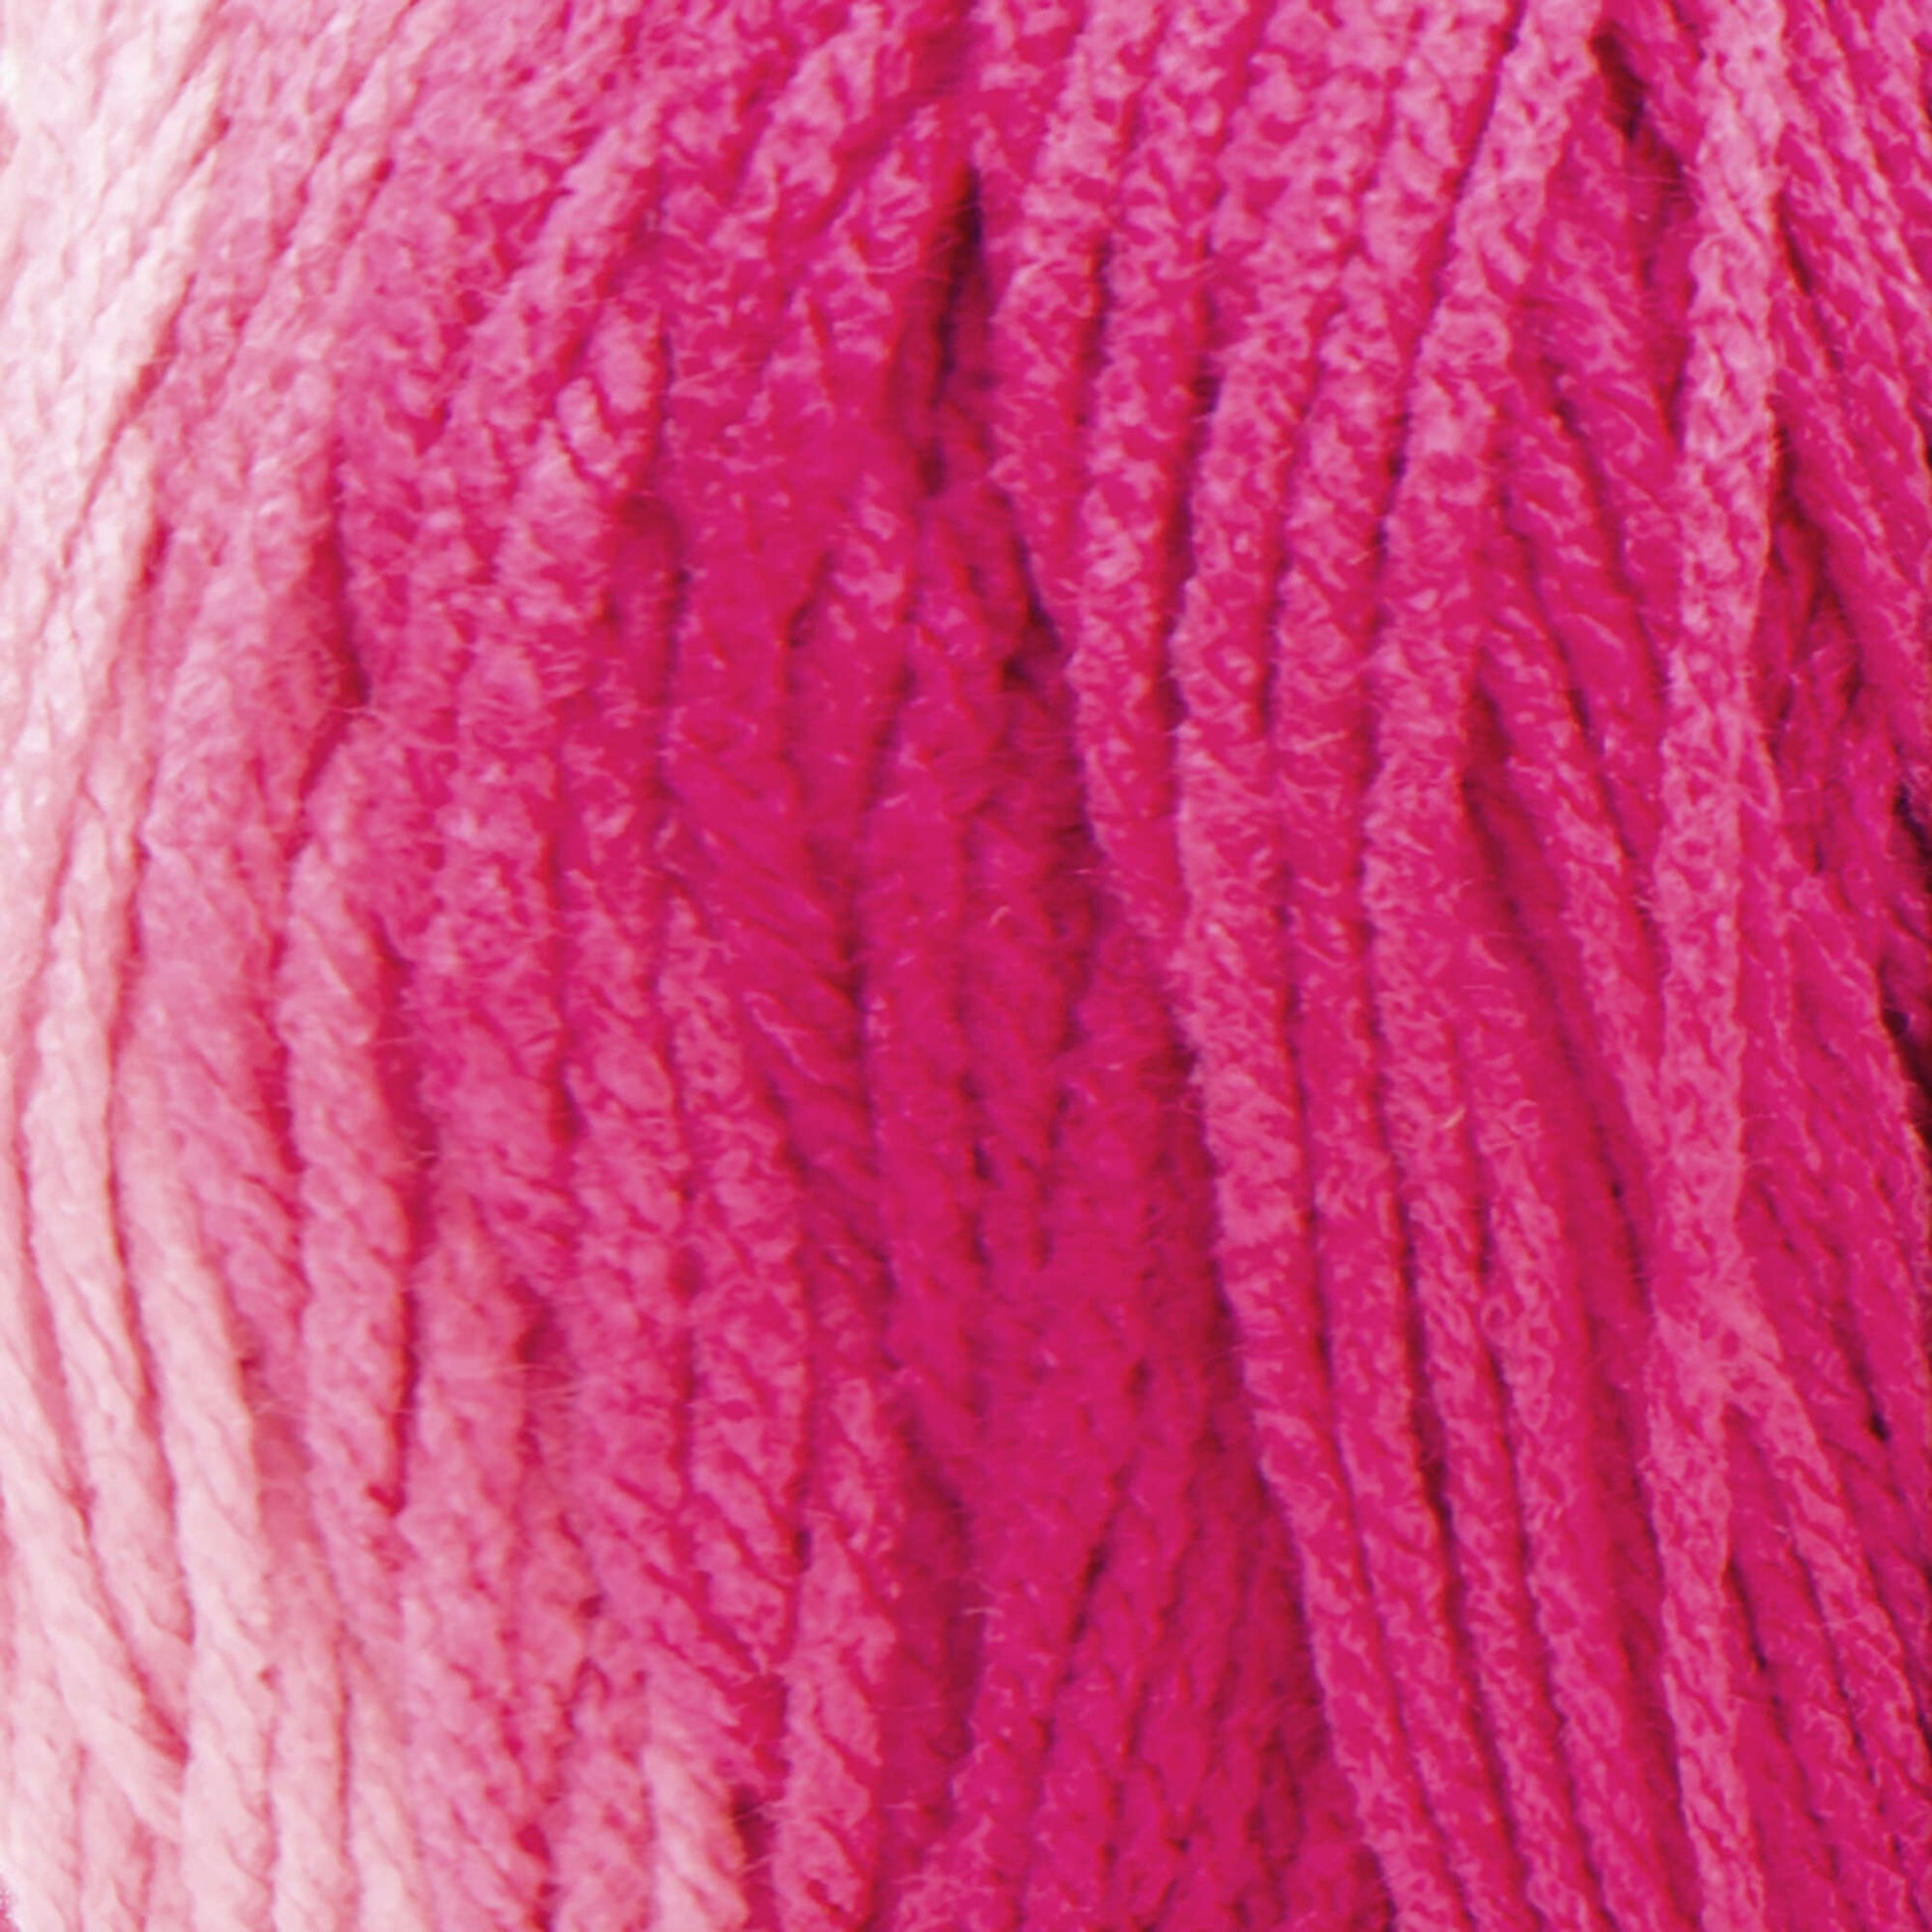 Red Heart Super Saver Ombre Yarn Jazzy